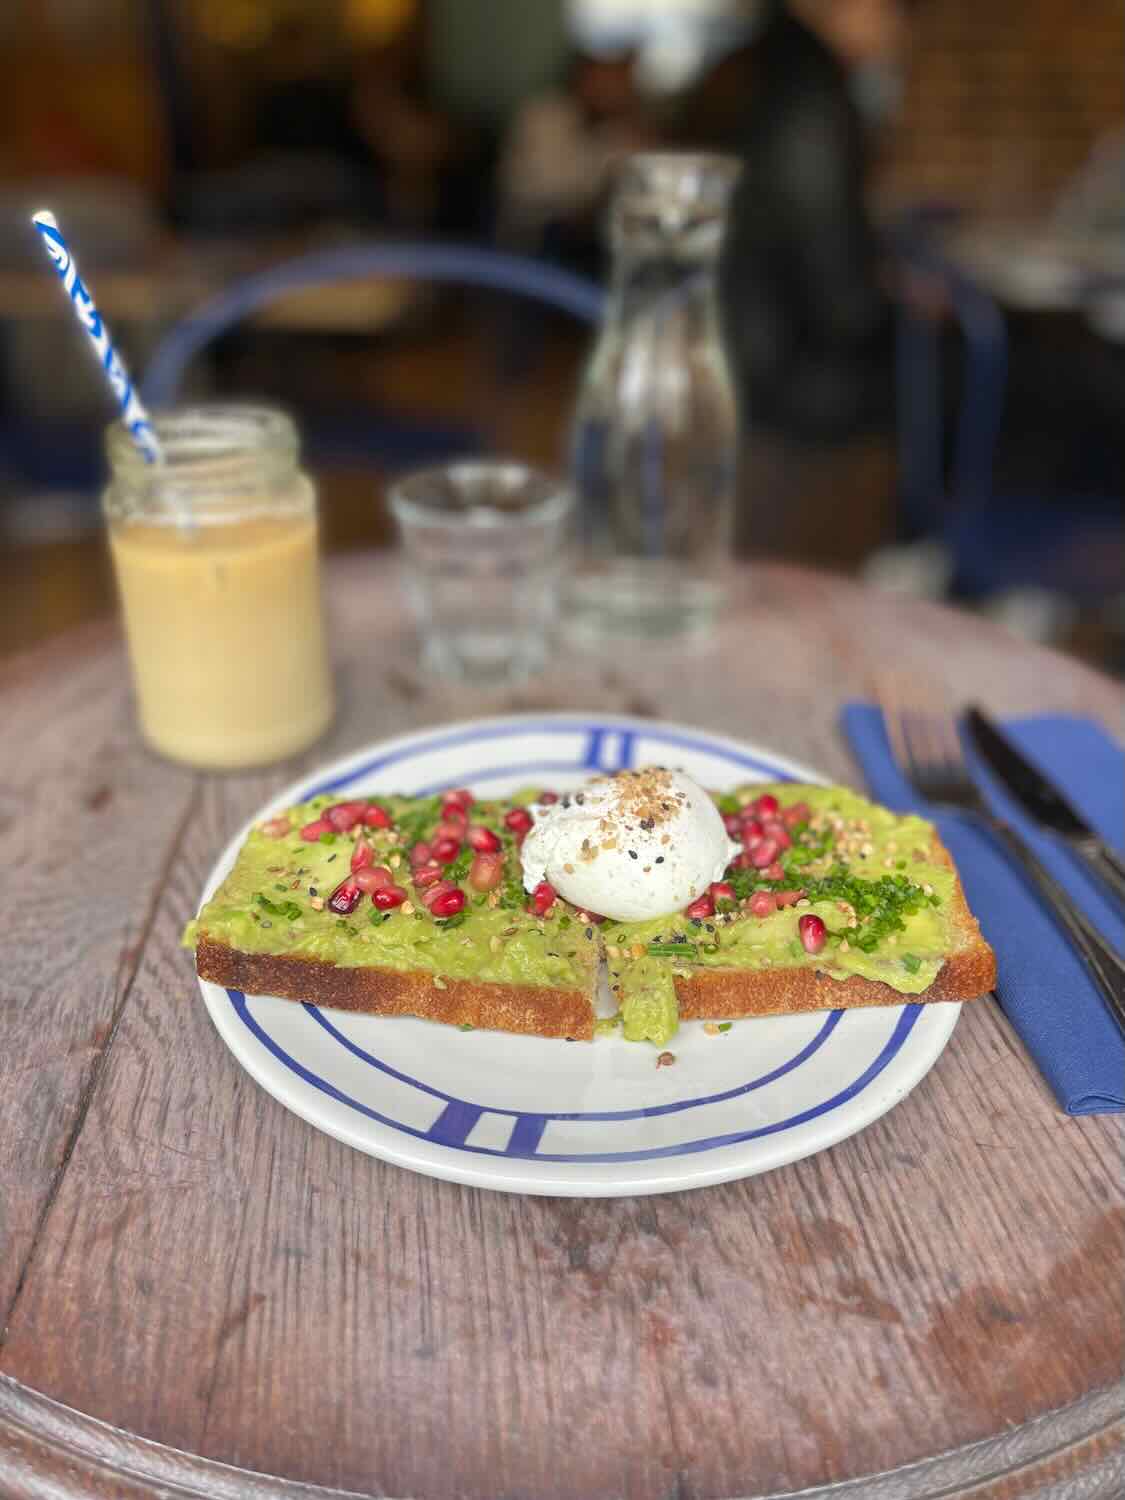 A beautifully presented avocado toast topped with pomegranate seeds and a poached egg, served on a striped blue and white plate, accompanied by a refreshing iced latte on a rustic wooden table.